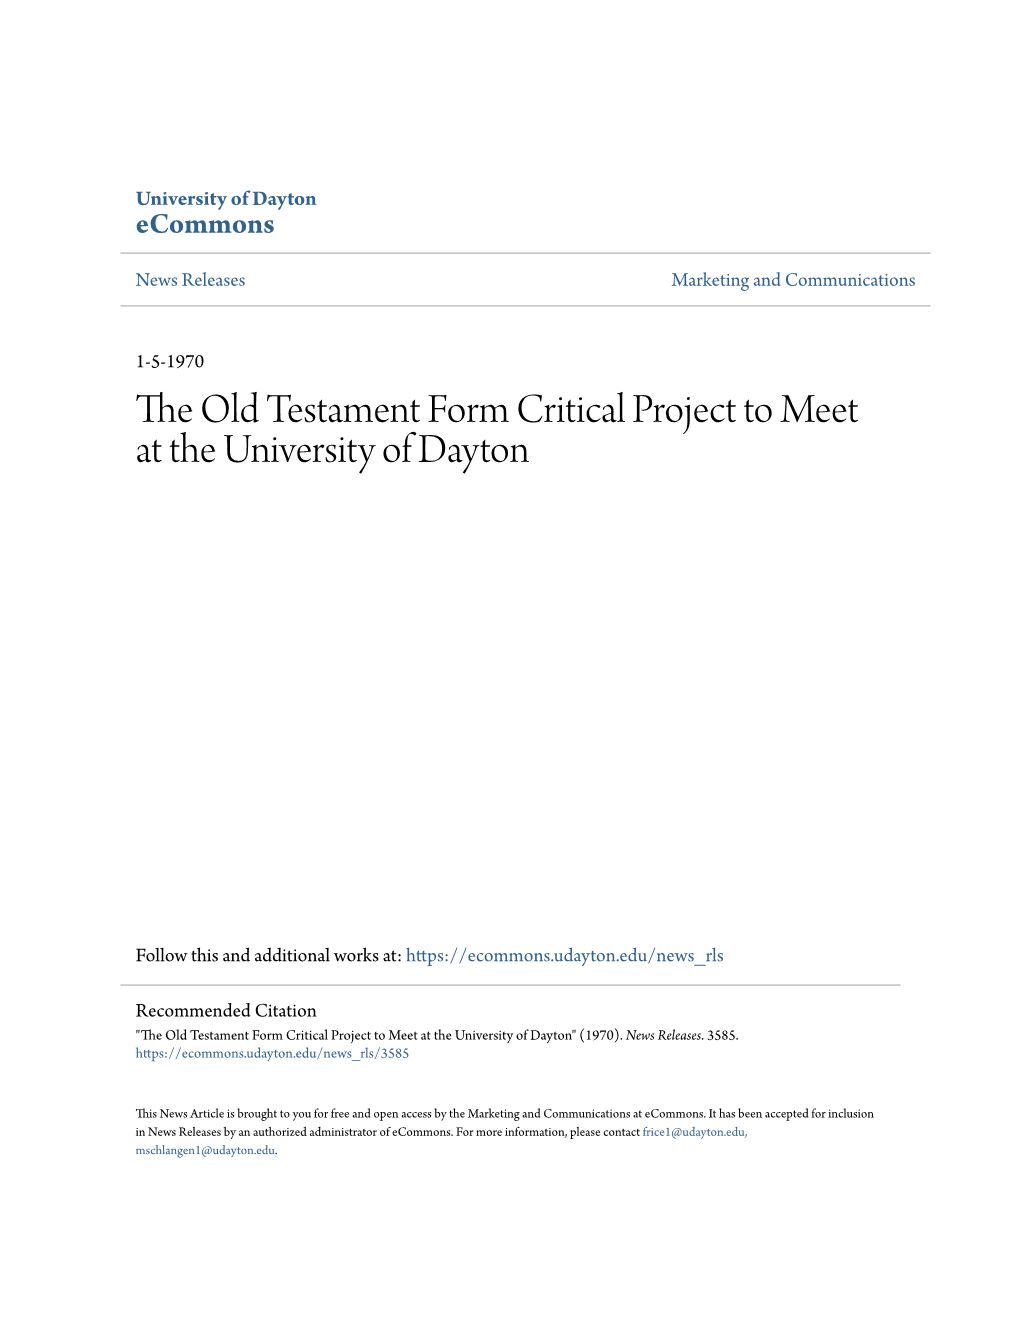 The Old Testament Form Critical Project to Meet at the University of Dayton